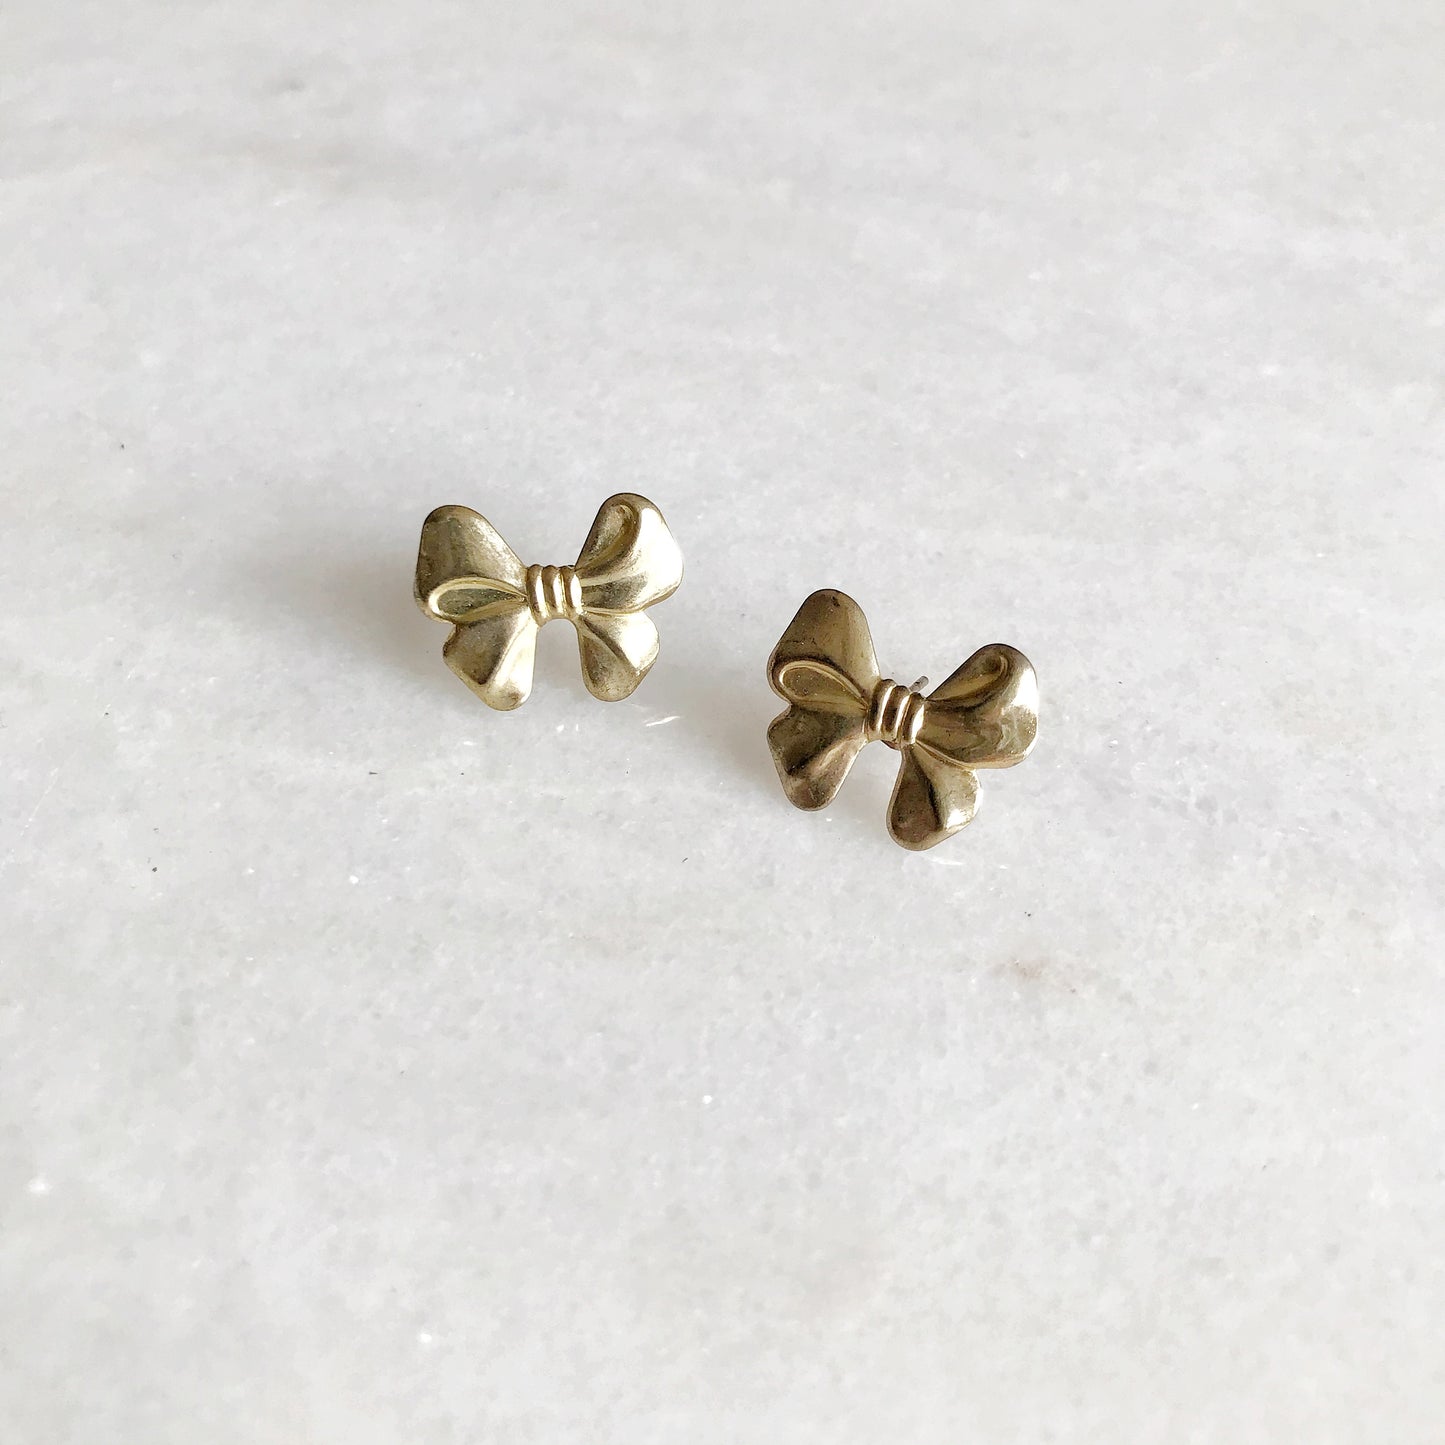 Vintage 90's Gold Bow Earrings